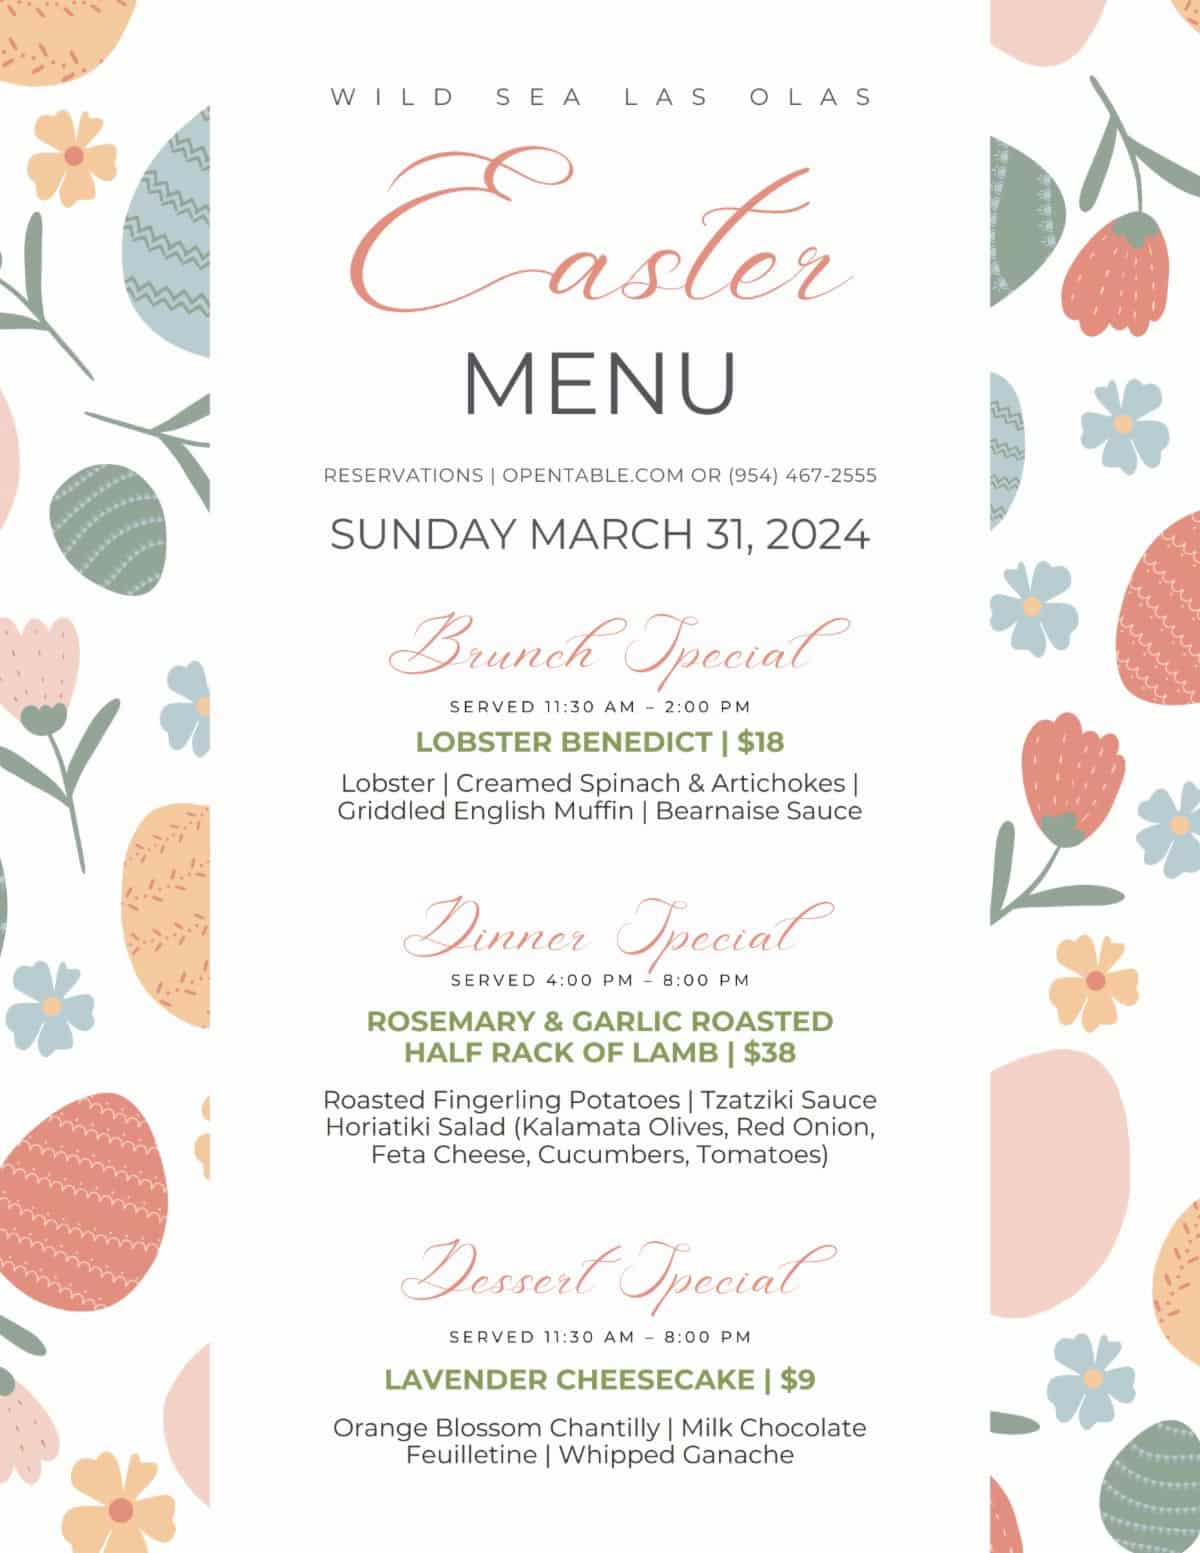 Hop Into Easter with a Memorable Meal at Wild Sea Las Olas!